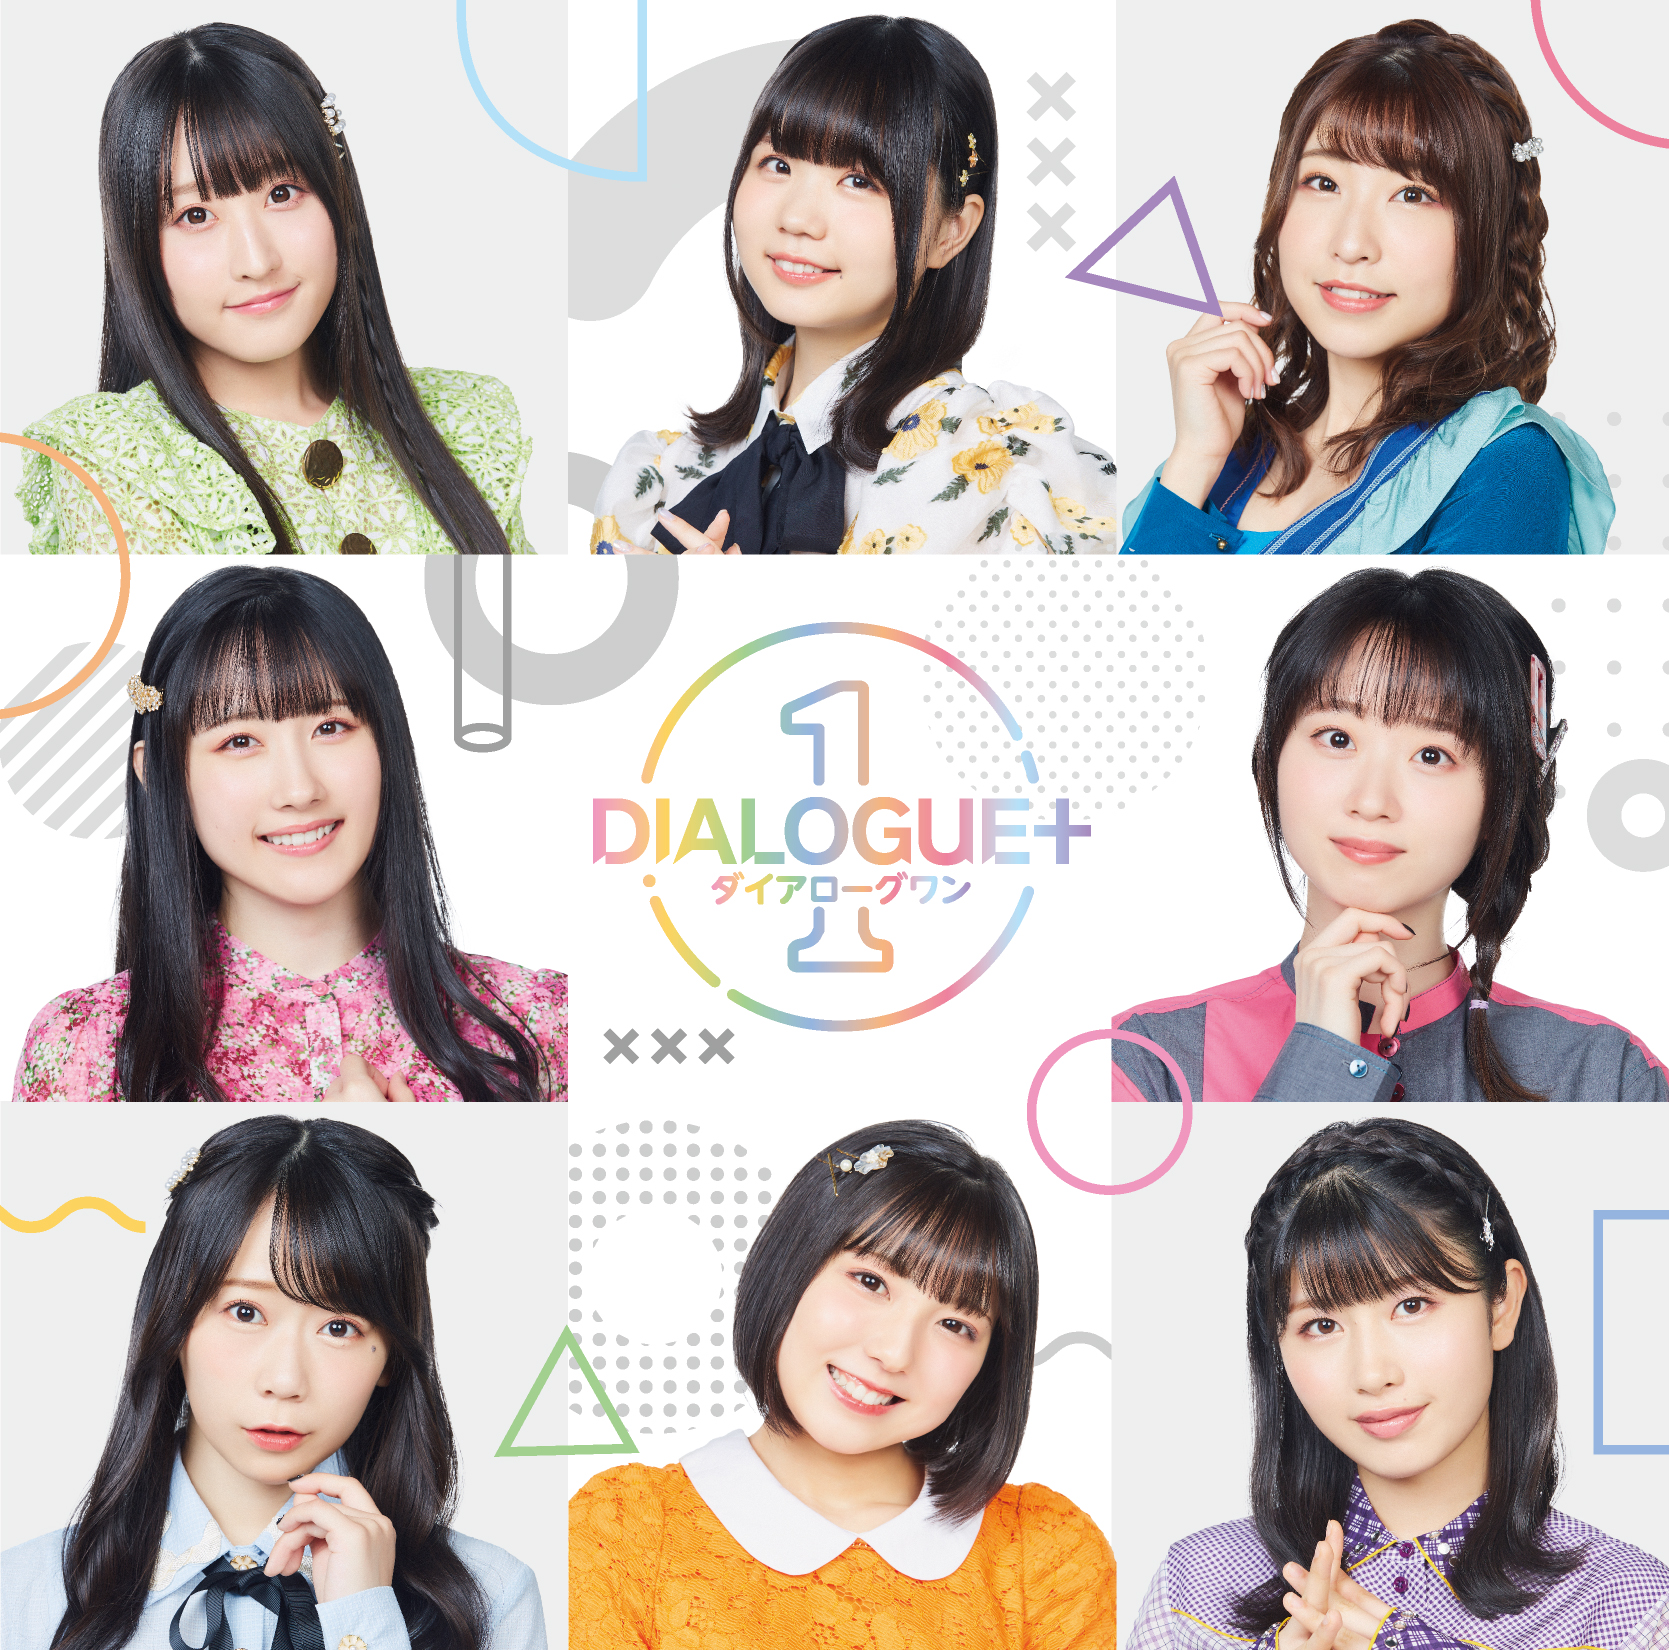 DIALOGUE+「DREAMY-LOGUE」初回限定盤（CD＋Blu-ray Disc） | きゃにめ